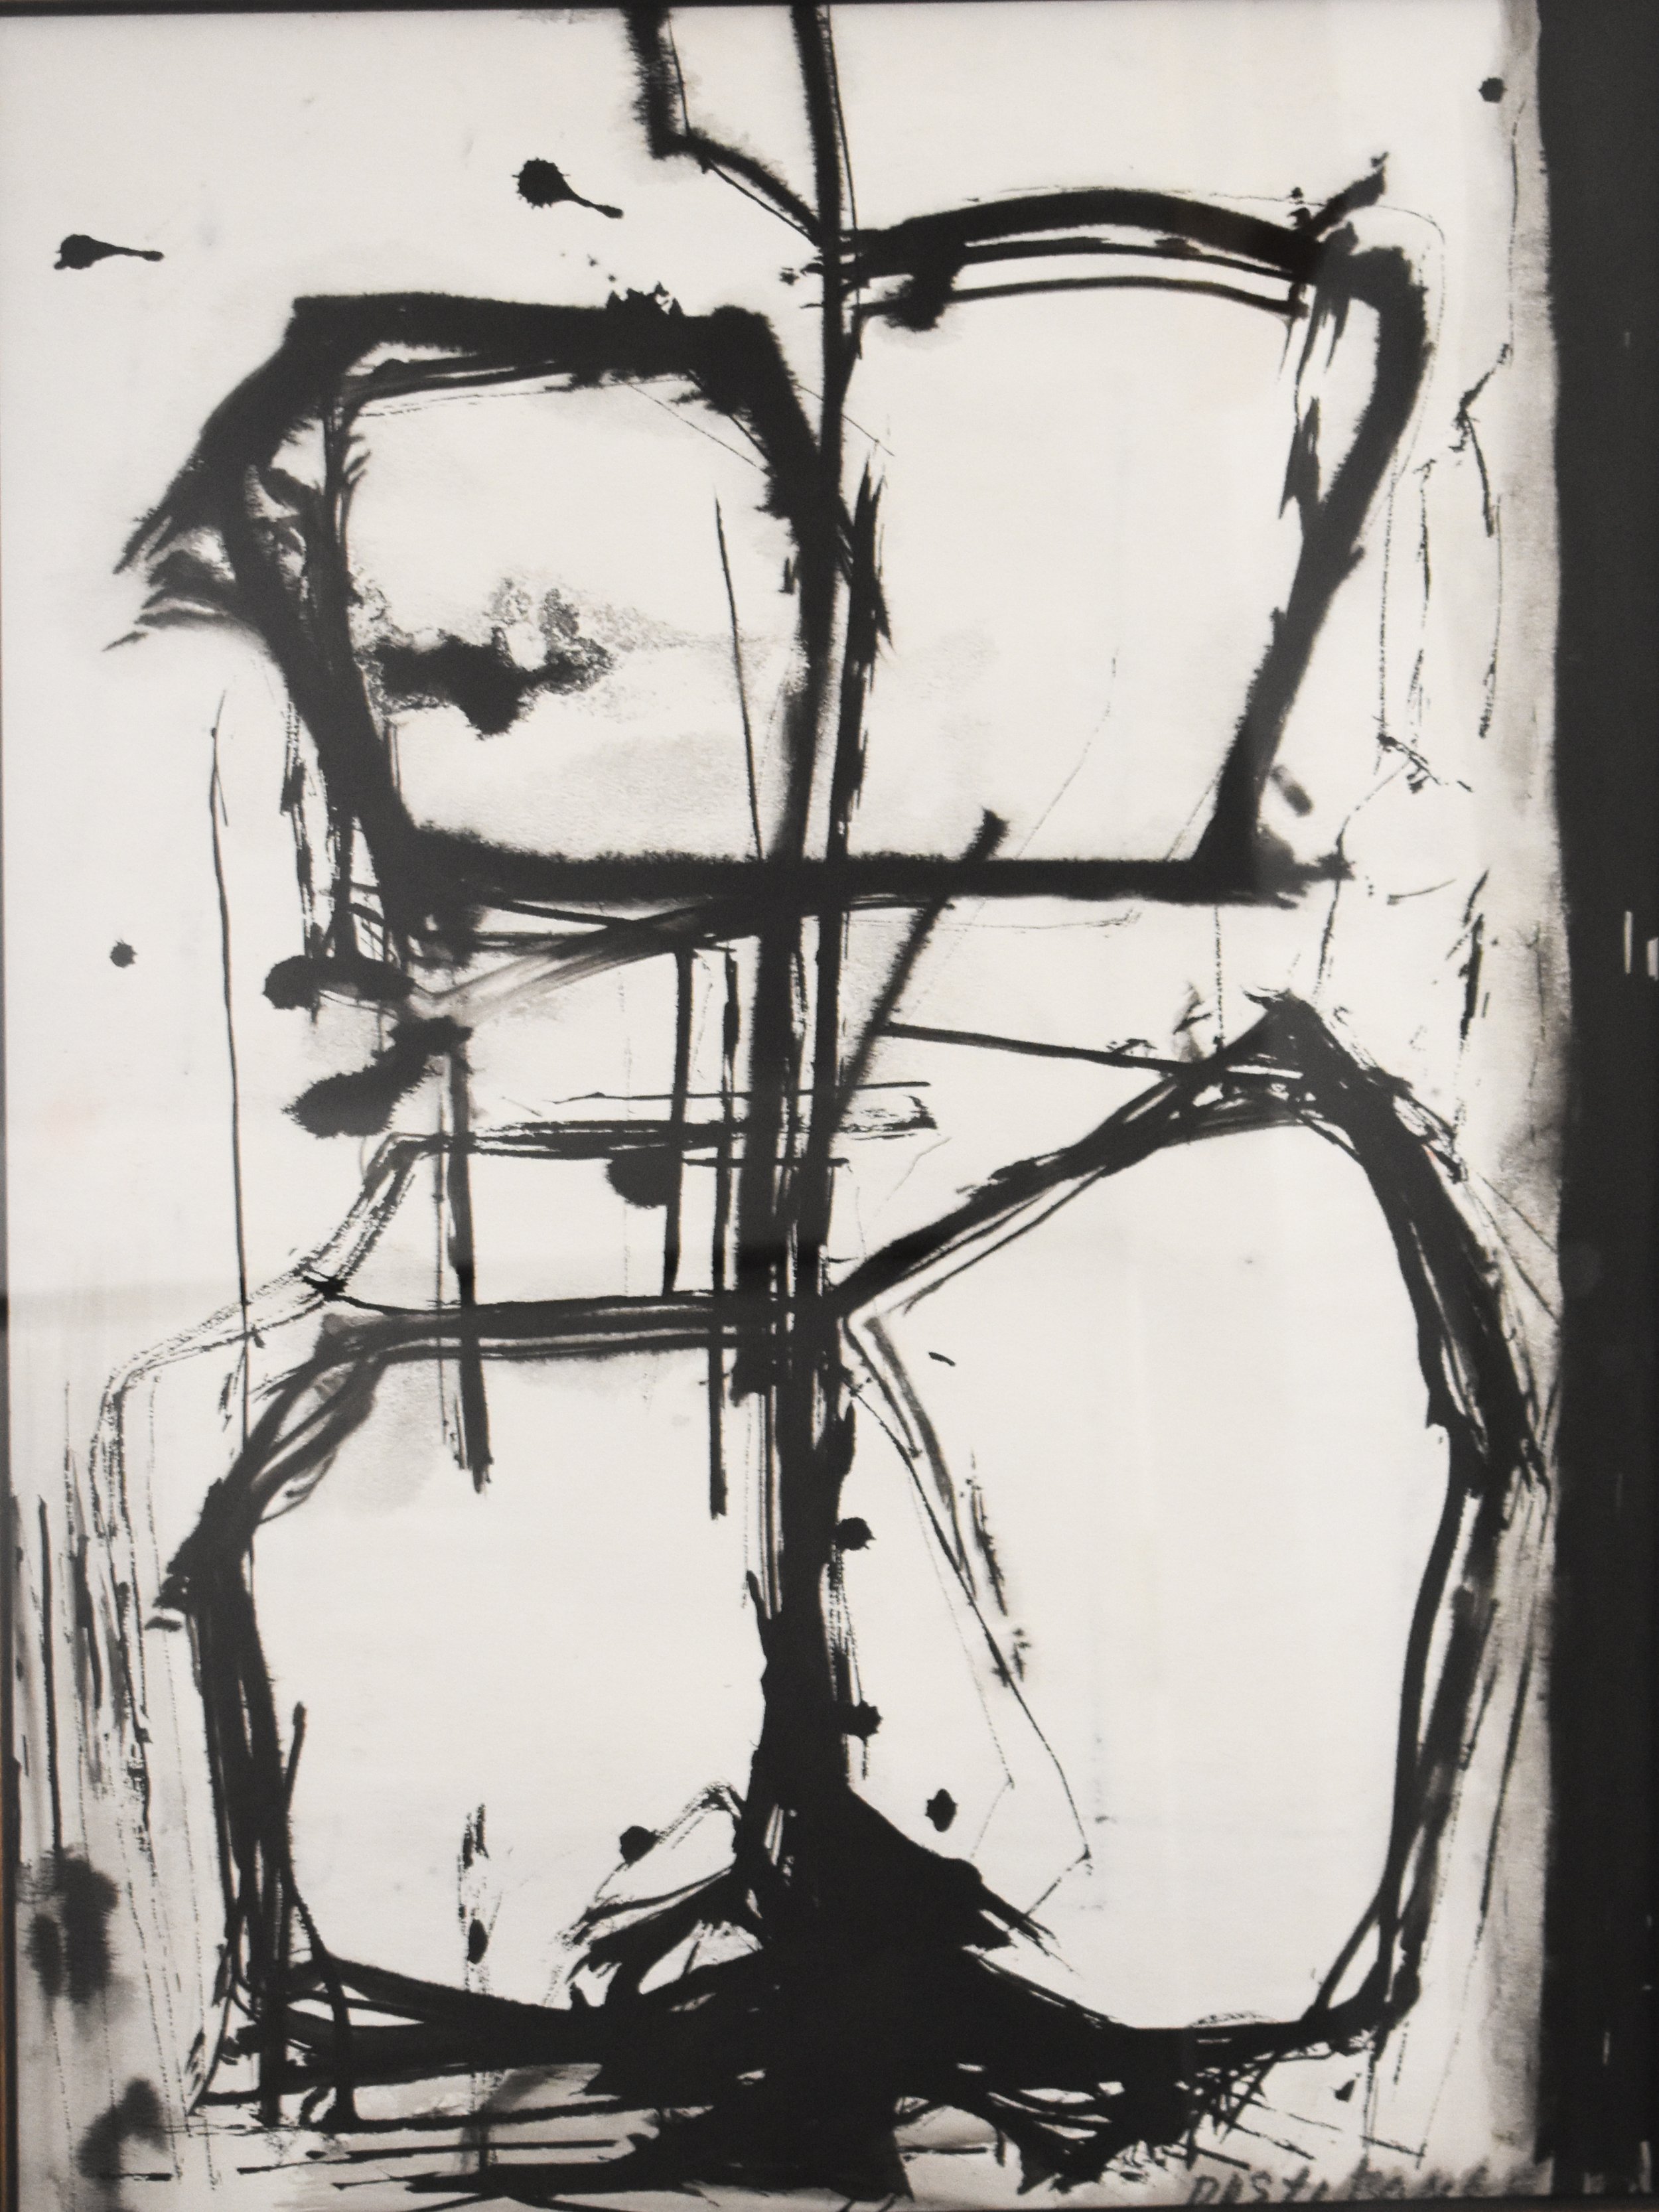  Untitled (Black and White Abstract with Orange), c. 1960  tempera on paper, signed lower right, 20 ¾ x 15 in.  Archivally matted and framed, 33 x 27 in.    